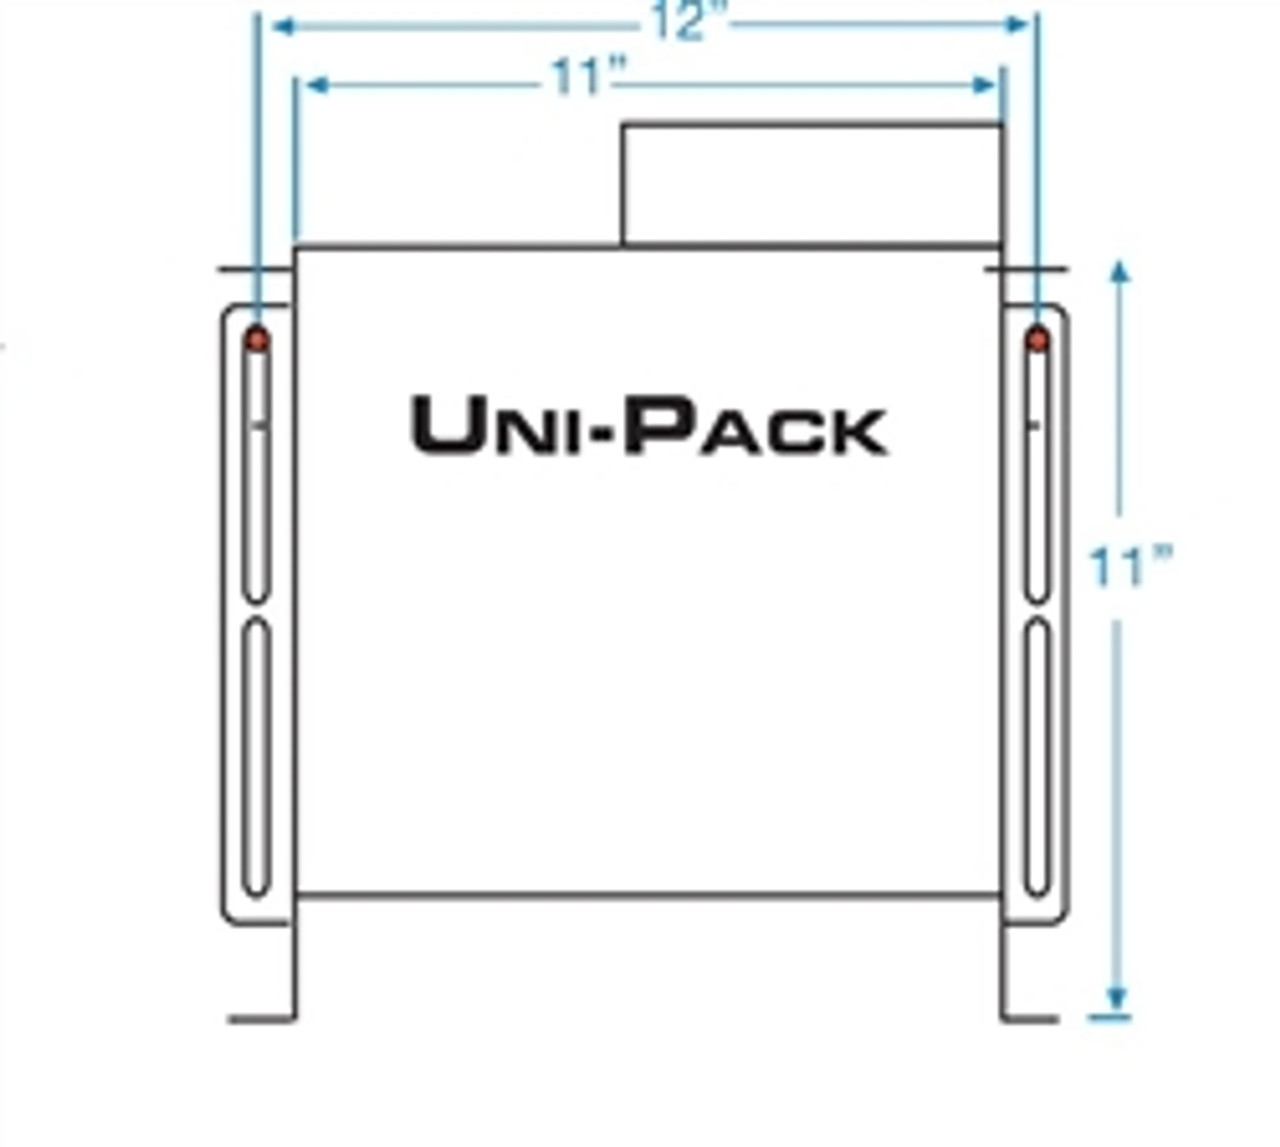 ACC Smartouch Digital 1000 - UniPack - No Heater